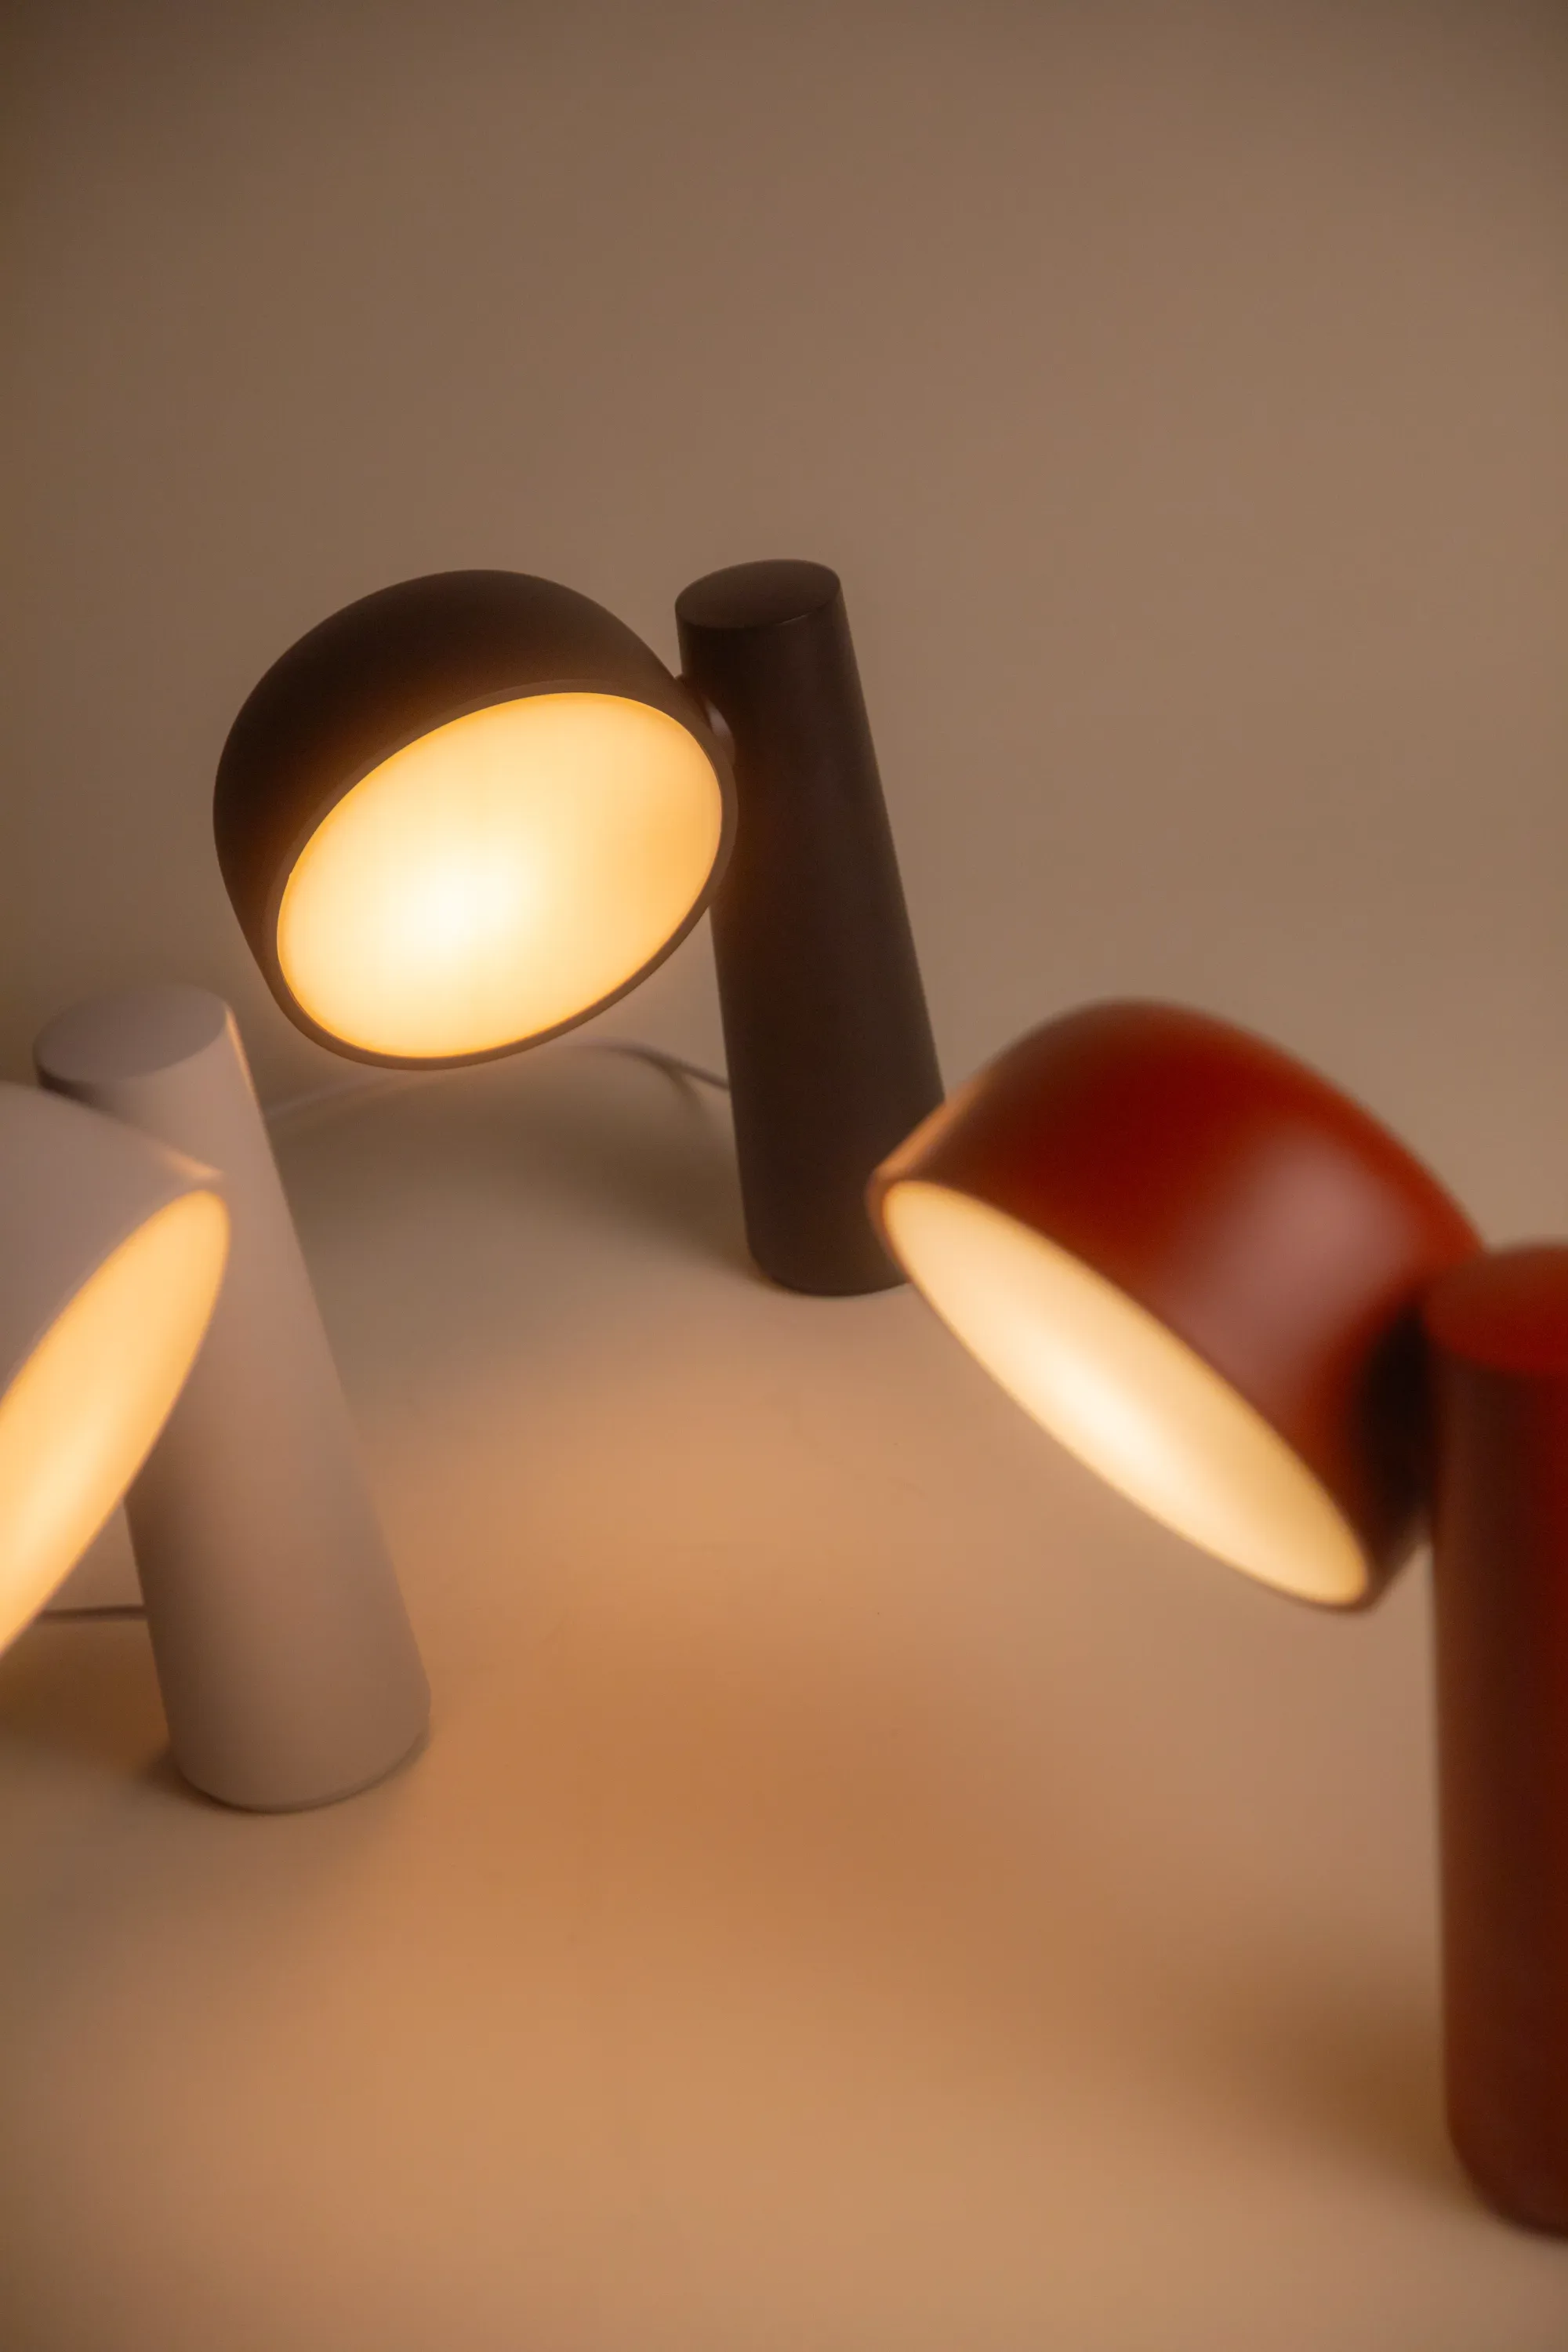 Three of Gantri’s Gio Task Light in different color models are pictured